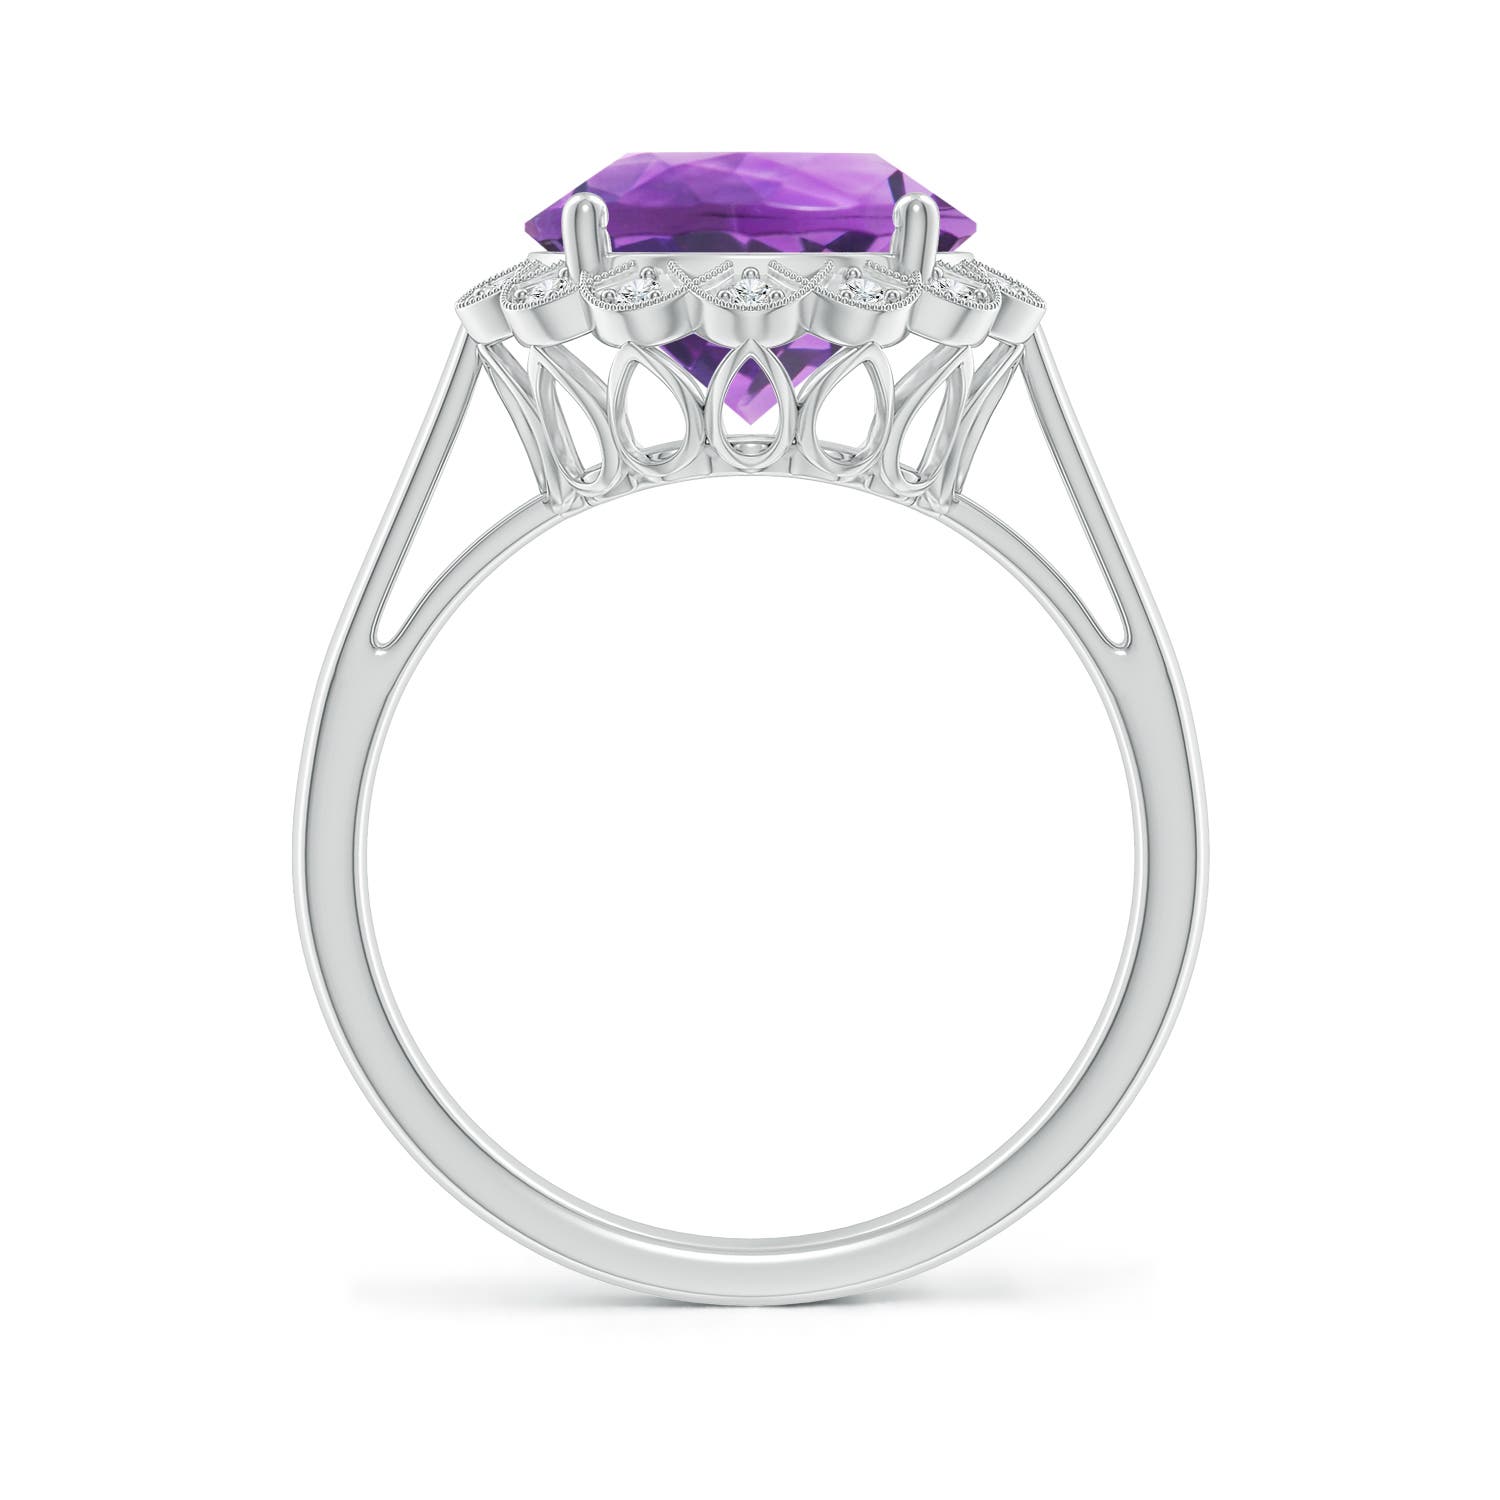 AA- Amethyst / 3.28 CT / 14 KT White Gold